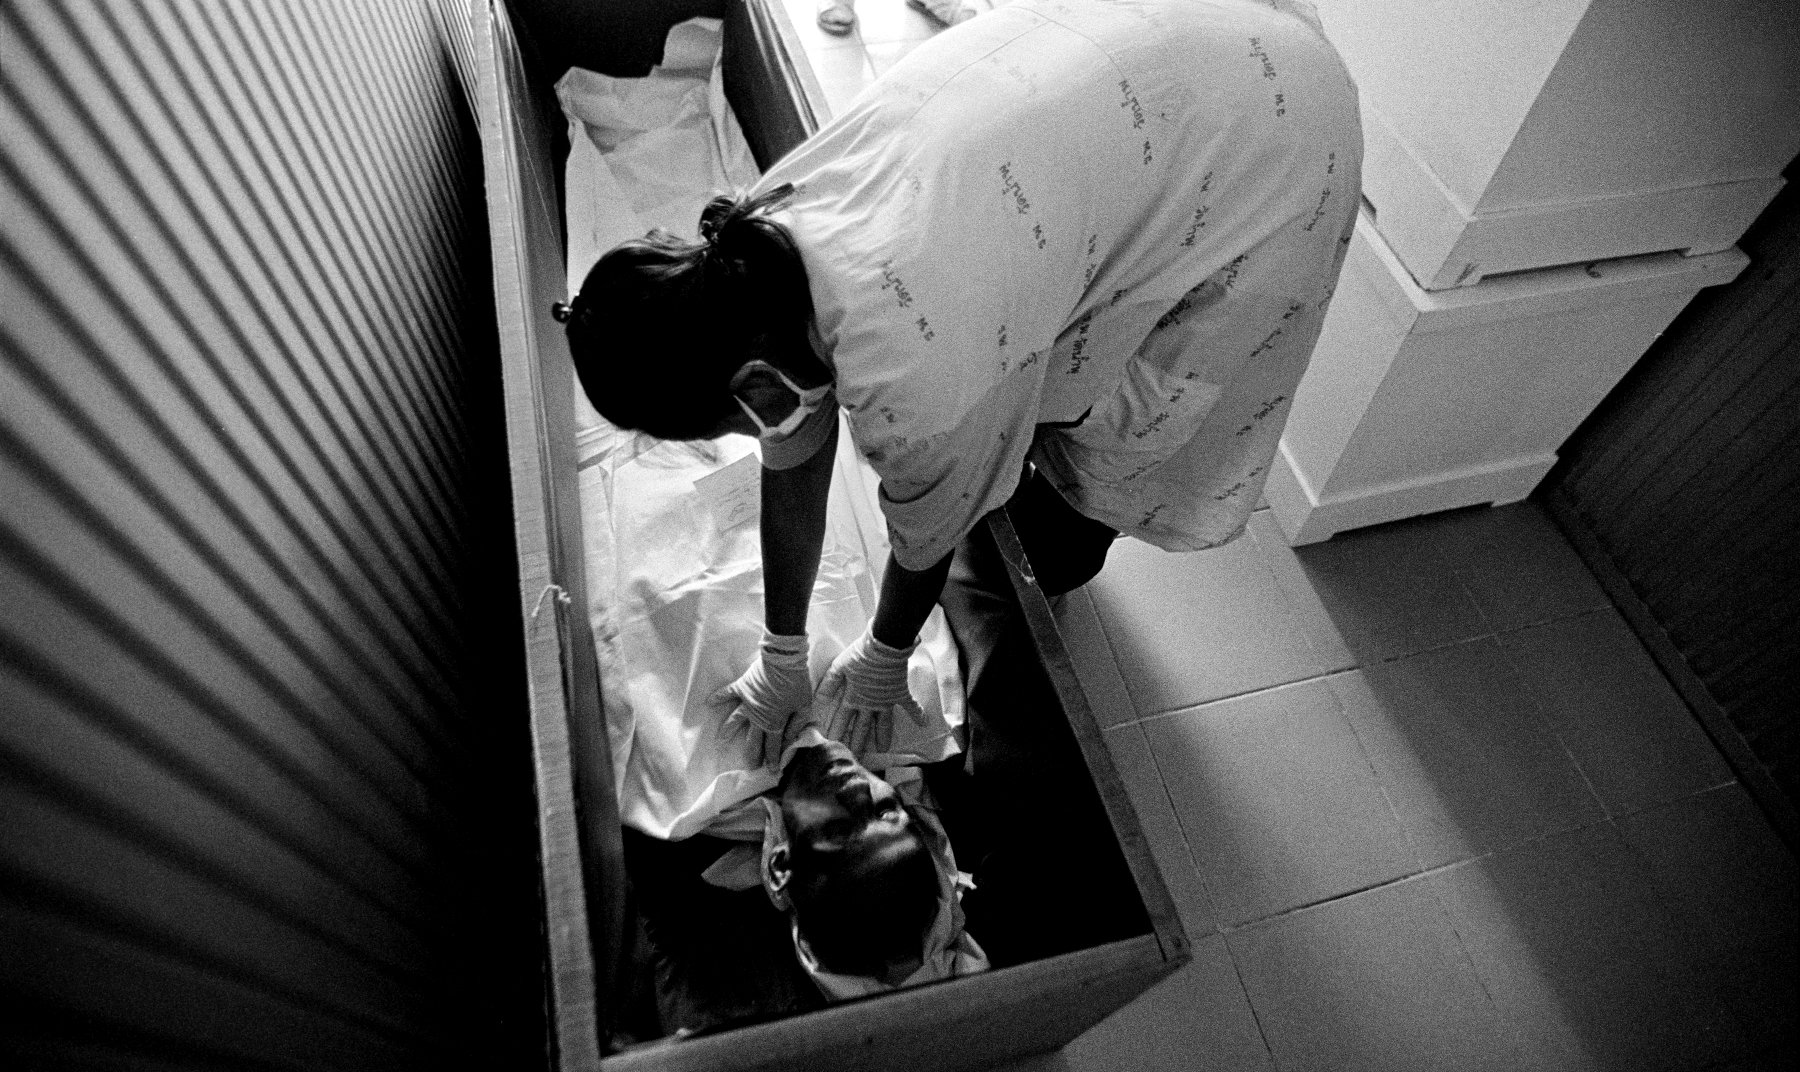  “Preparation” A volunteer carer prepares a deceased patient for cremation at Wat Prabat Nampu. Wat Prabat Nampu is a Buddhist temple and a hospice for those living with HIV. Lopburi, Thailand. 2003. 